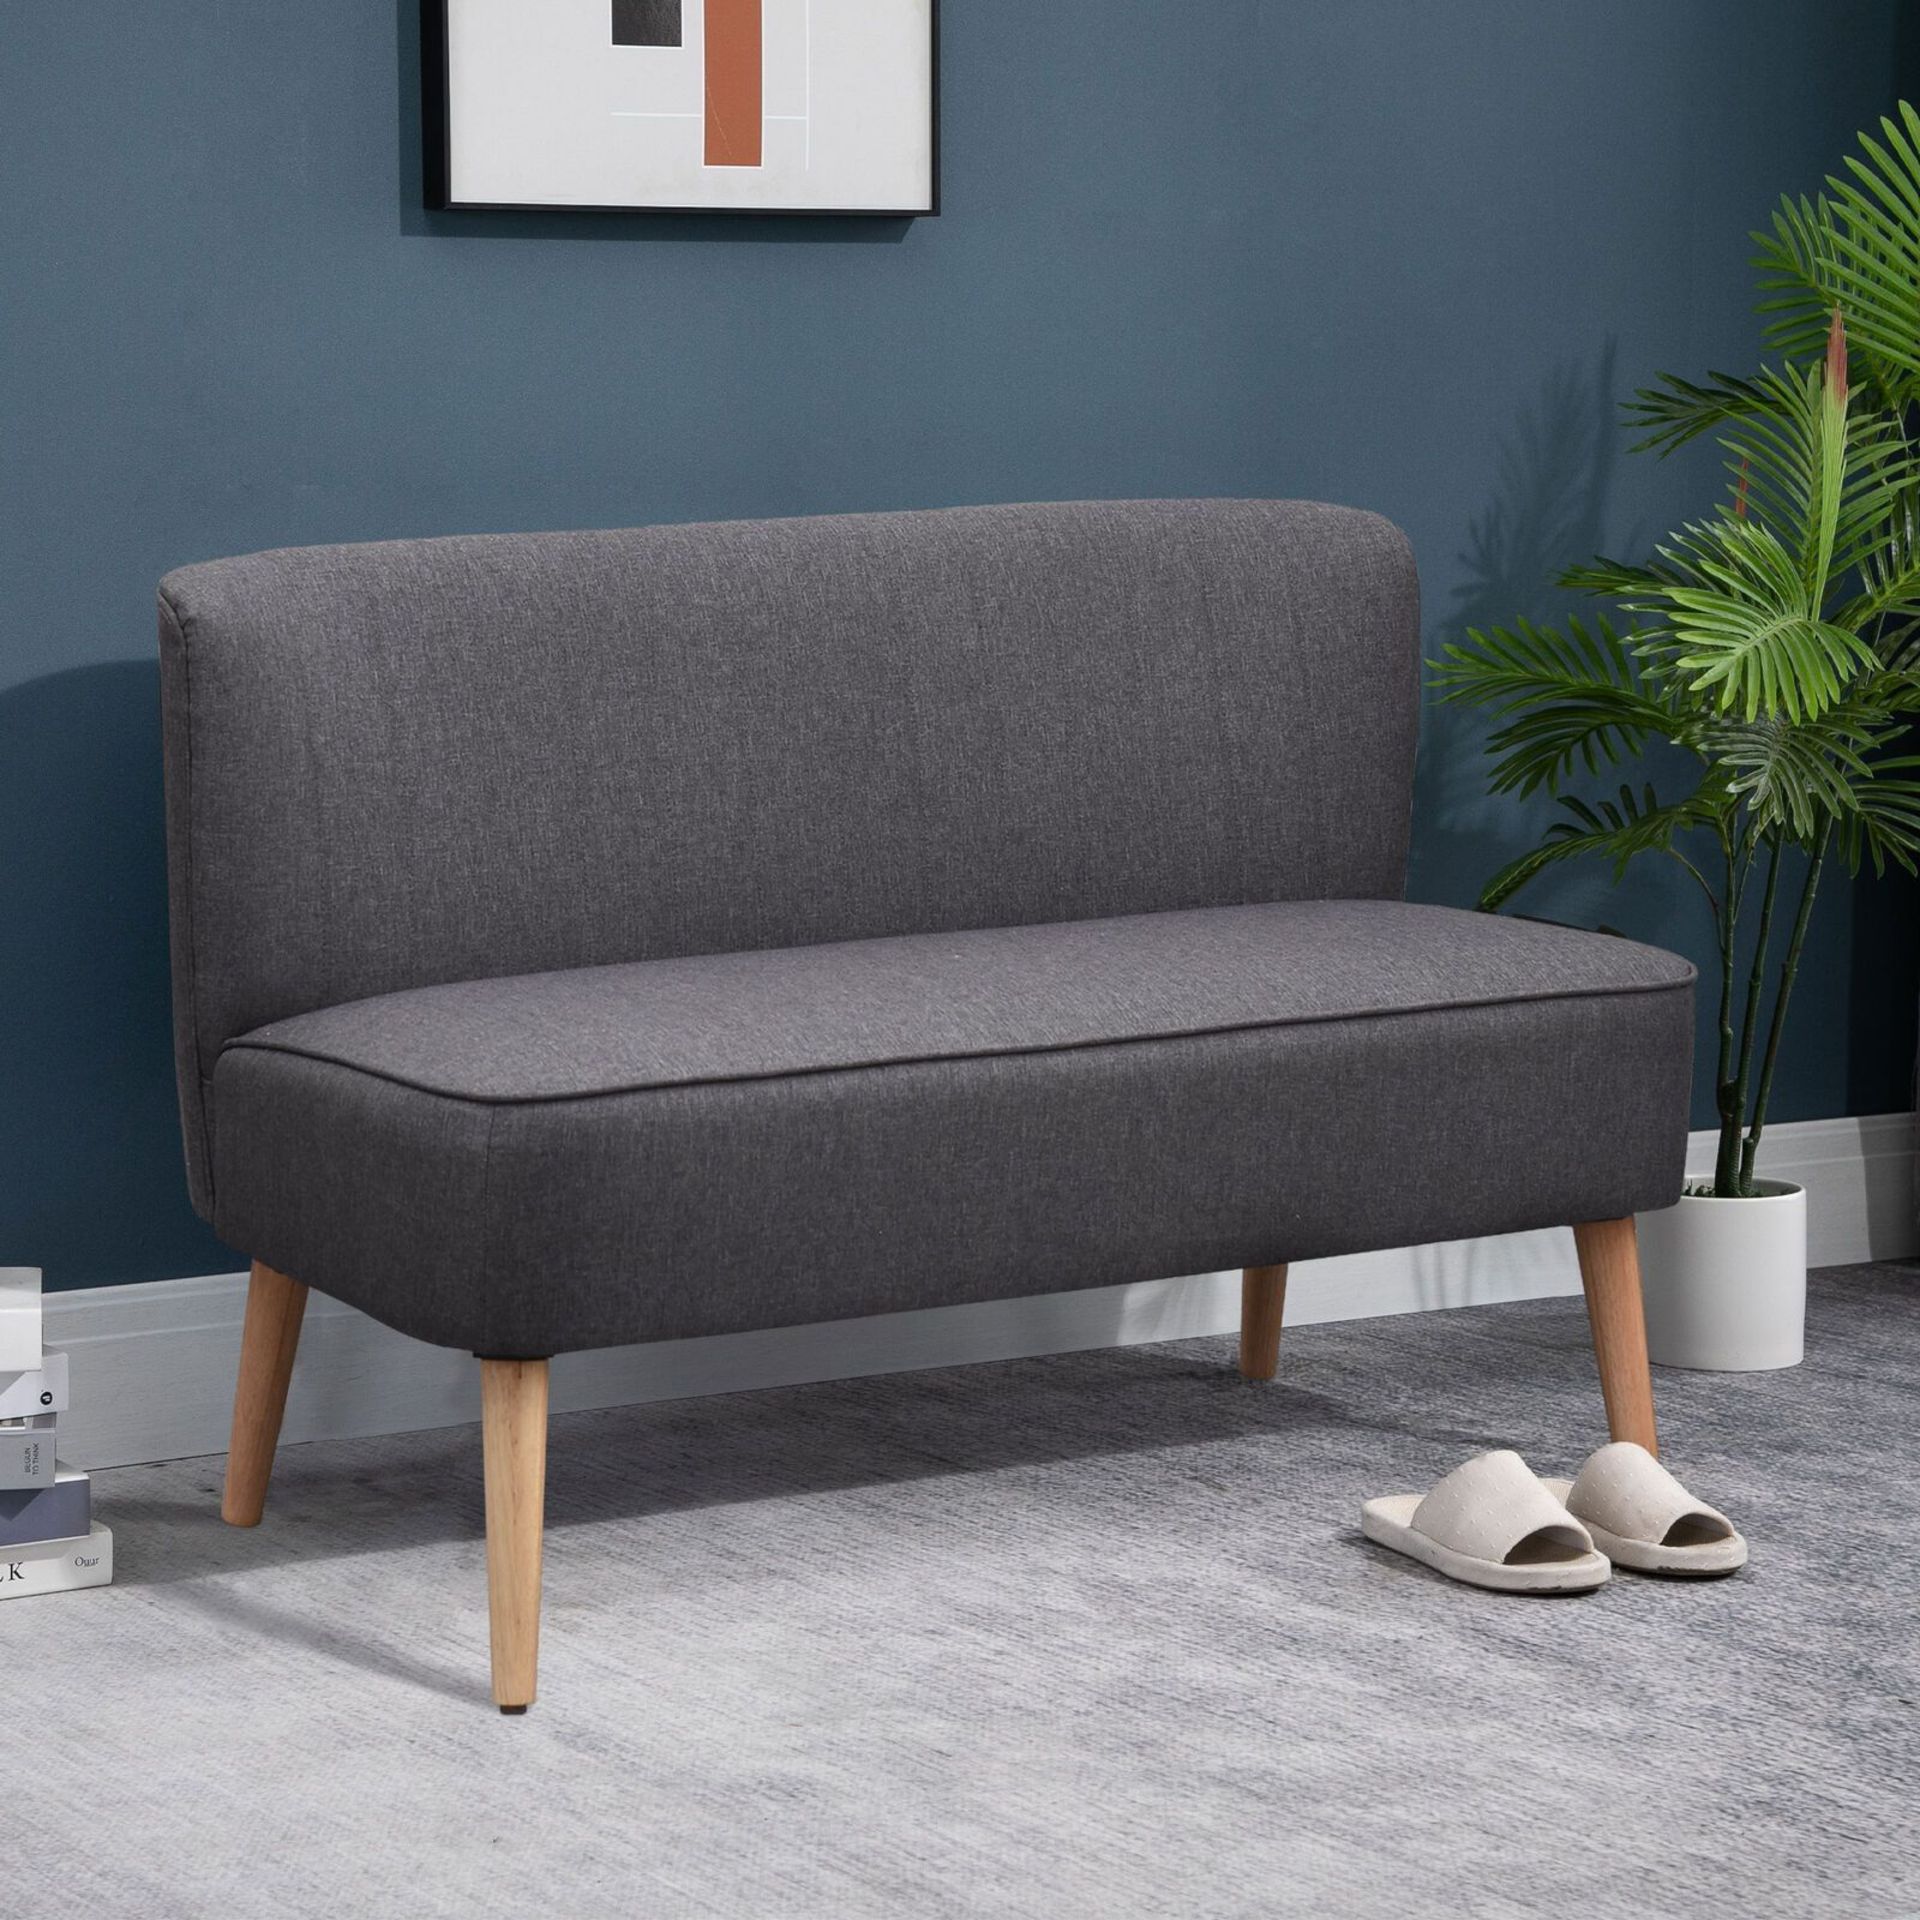 Modern Double Seat Sofa Loveseat Couch Padded Linen Wood Legs, Dark Grey. - R13a.4. This - Image 2 of 2